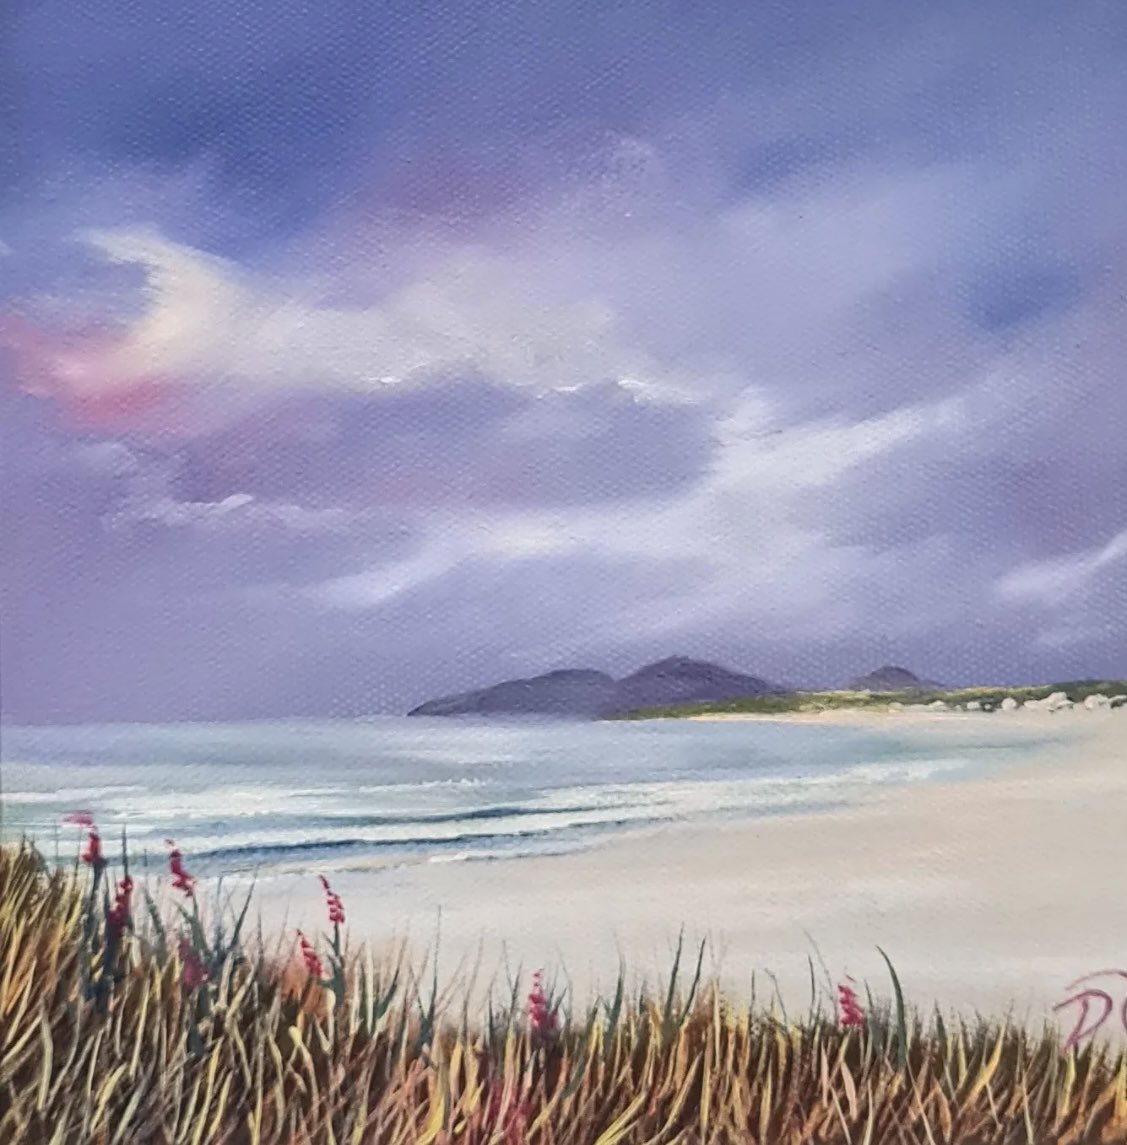 Douglas Roulston West Beach Berneray Oil on Canvas 8” x 8” Framed artwork500.co.uk/product/west-b… 📩 PM For Further Enquiries 🚚 Free Postage Throughout the UK 📲 Klarna, Clearpay Options Available #lochness #scotland #lochnessmonster #highlands #inverness #nessie #scottishhighlands